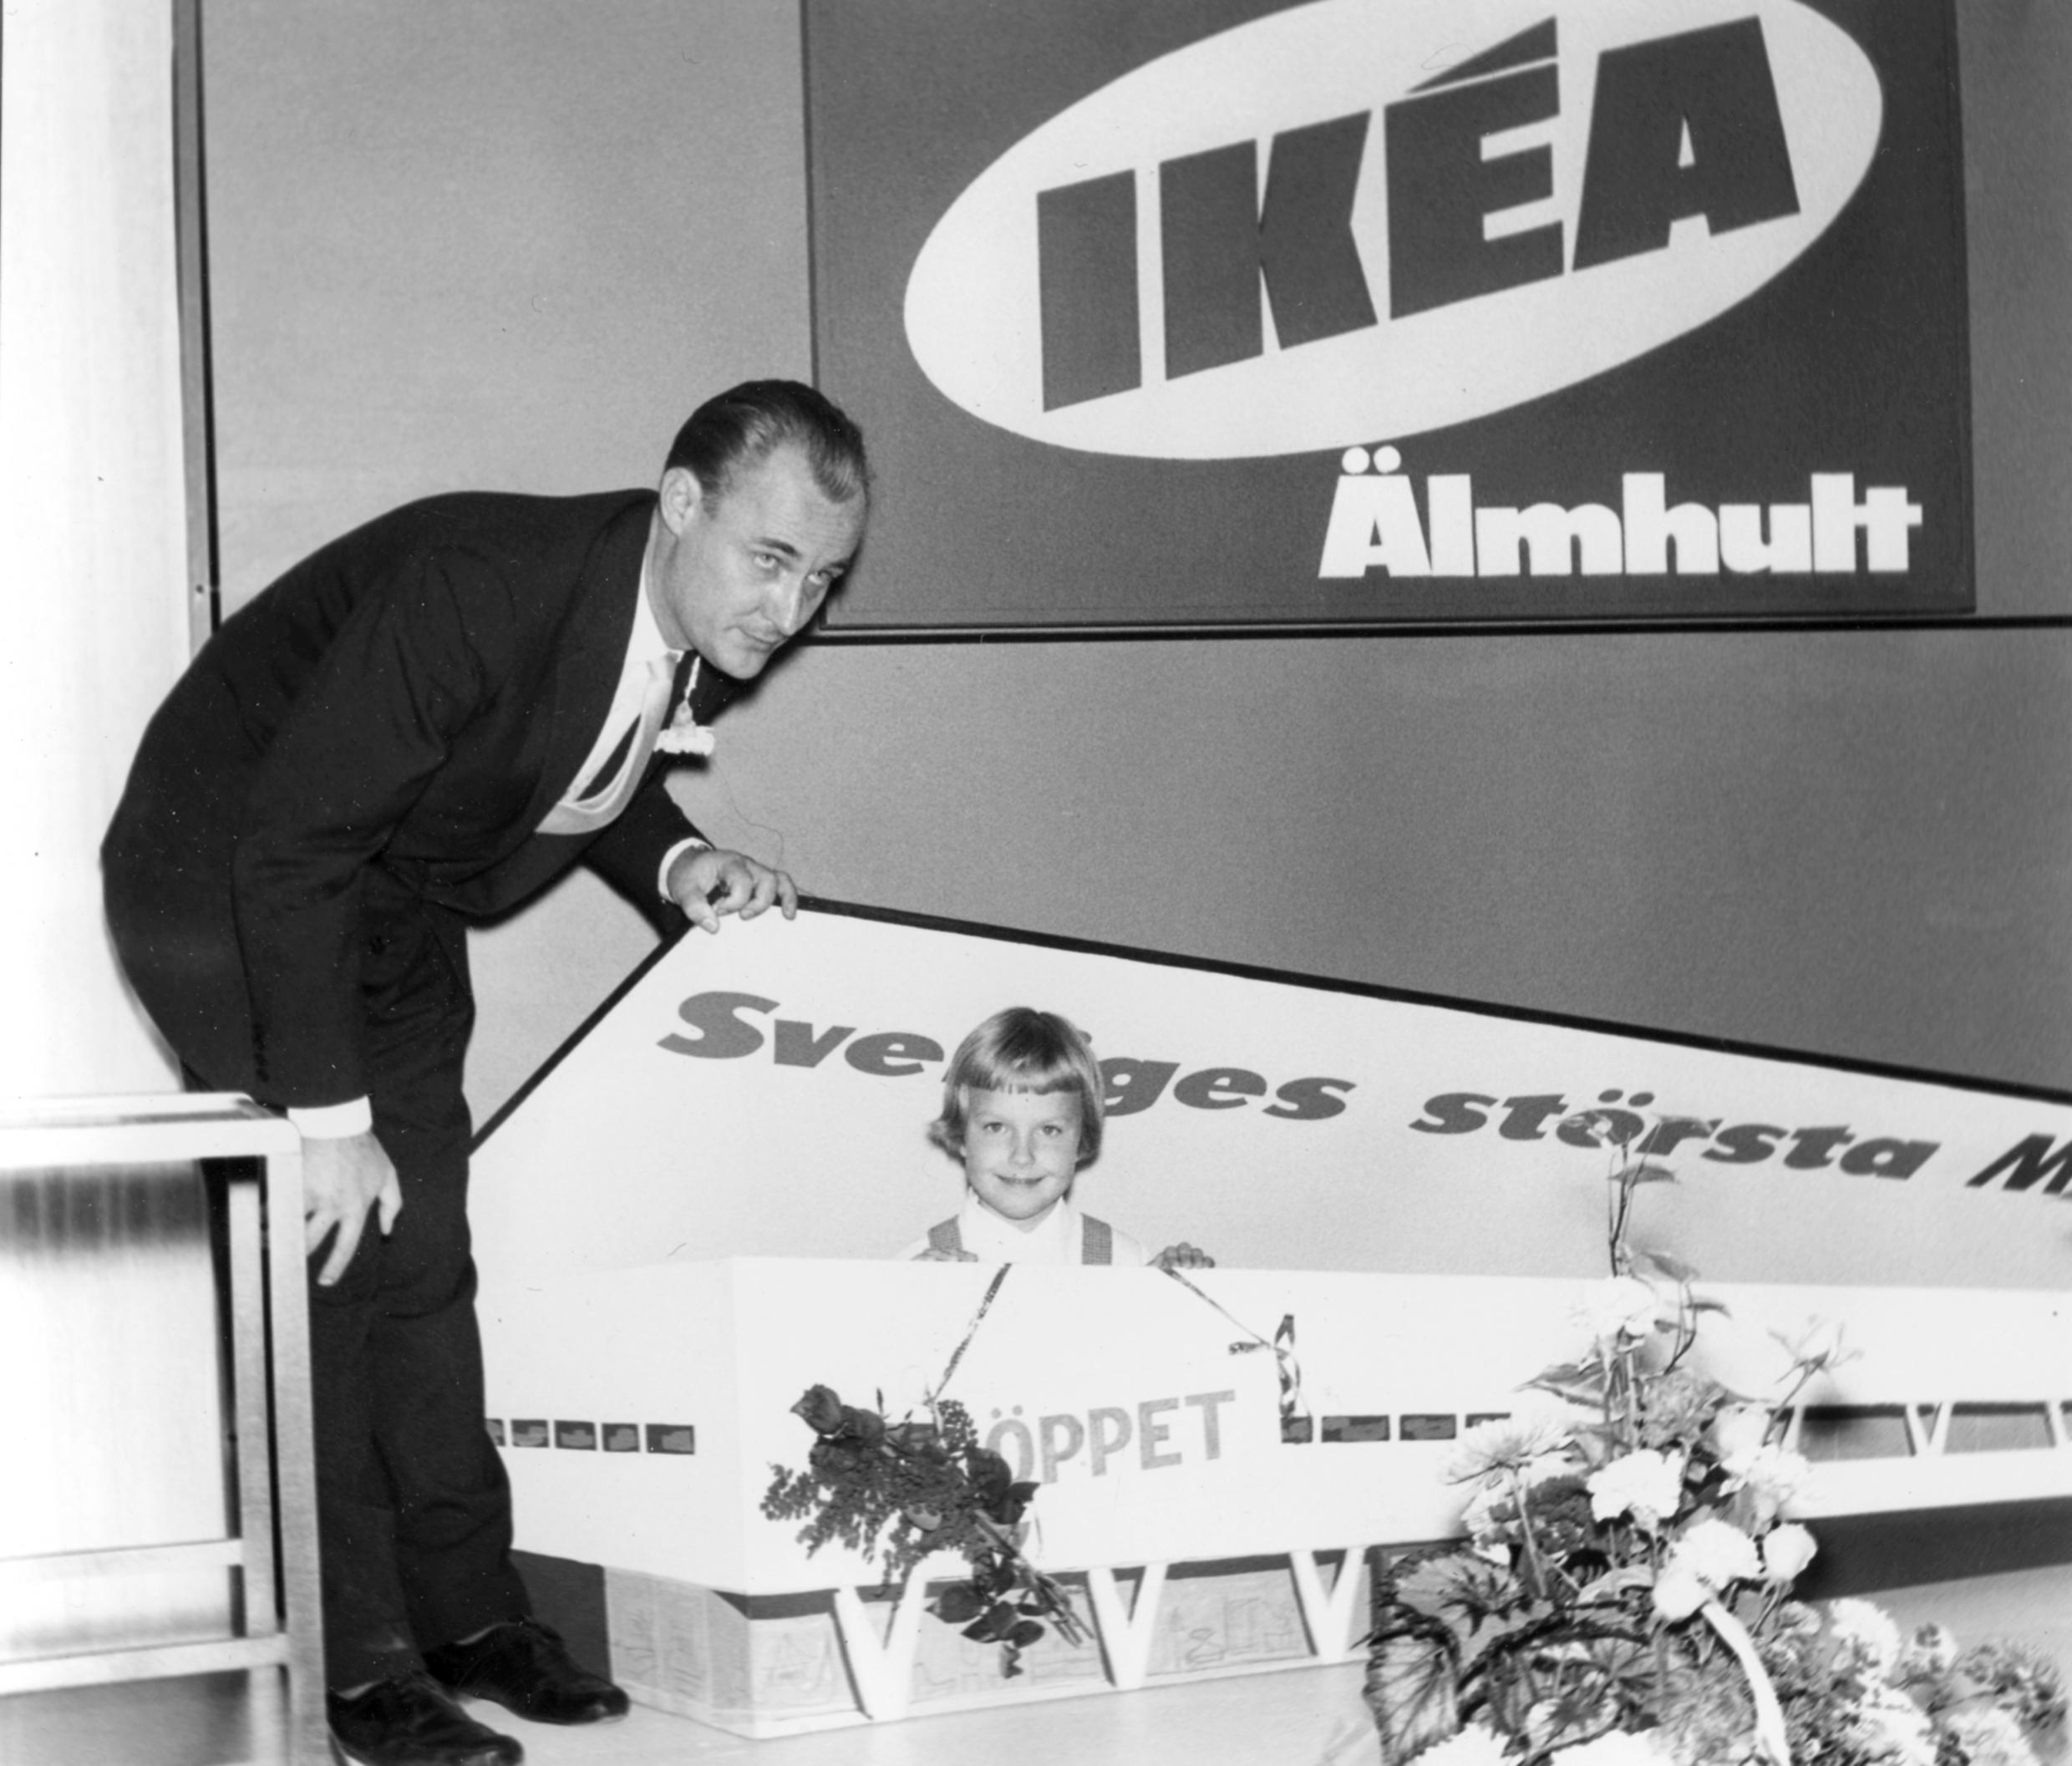 Ingvar Kamprad in a suit, leaning forward opening a cardboard box with a little girl inside. On the wall is a sign that reads &quot;IKEA Älmhult&quot;.